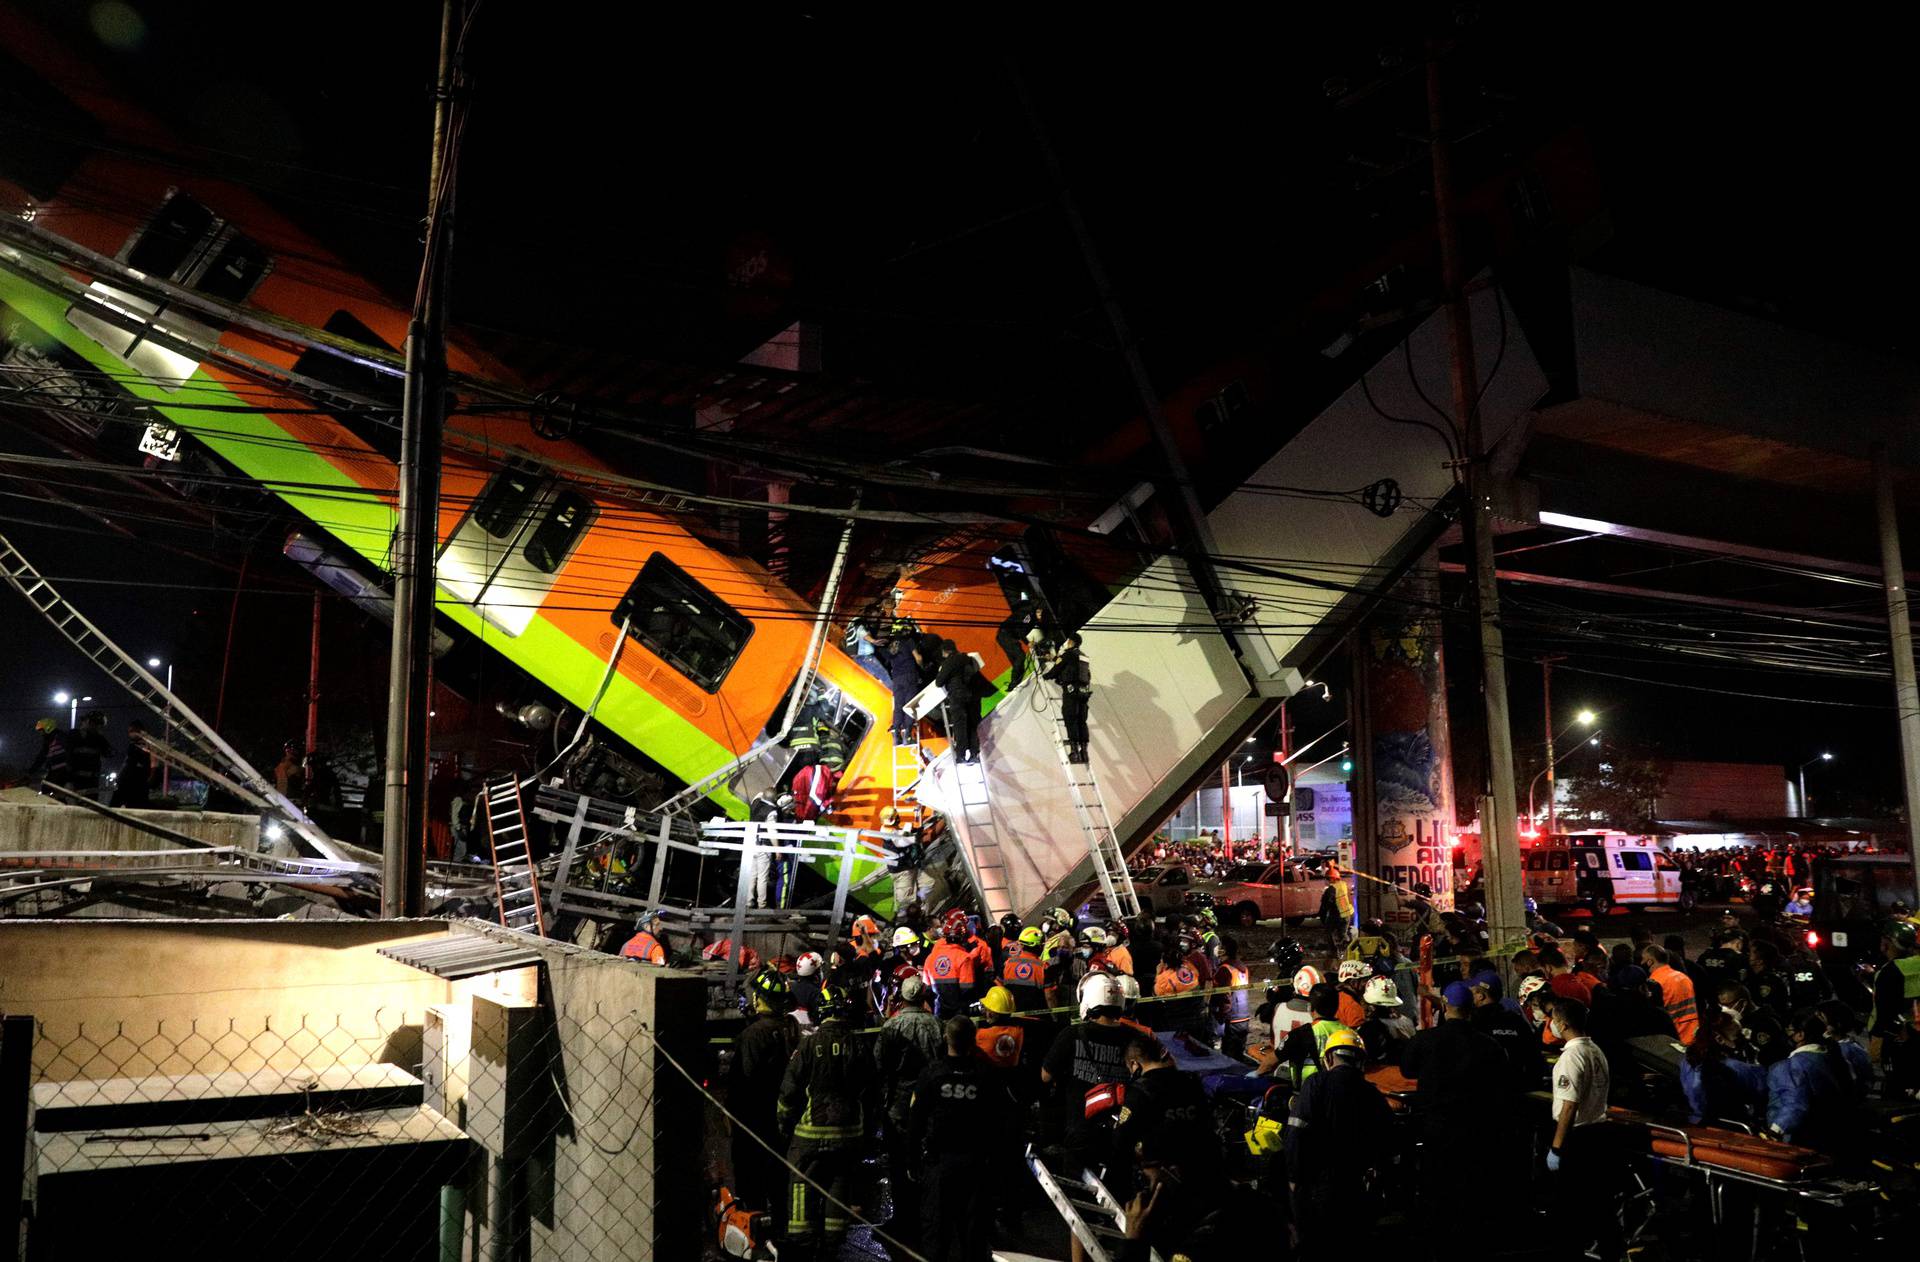 Rescuers work at a site where an overpass for a metro partially collapsed with train cars on it at Olivos station in Mexico City